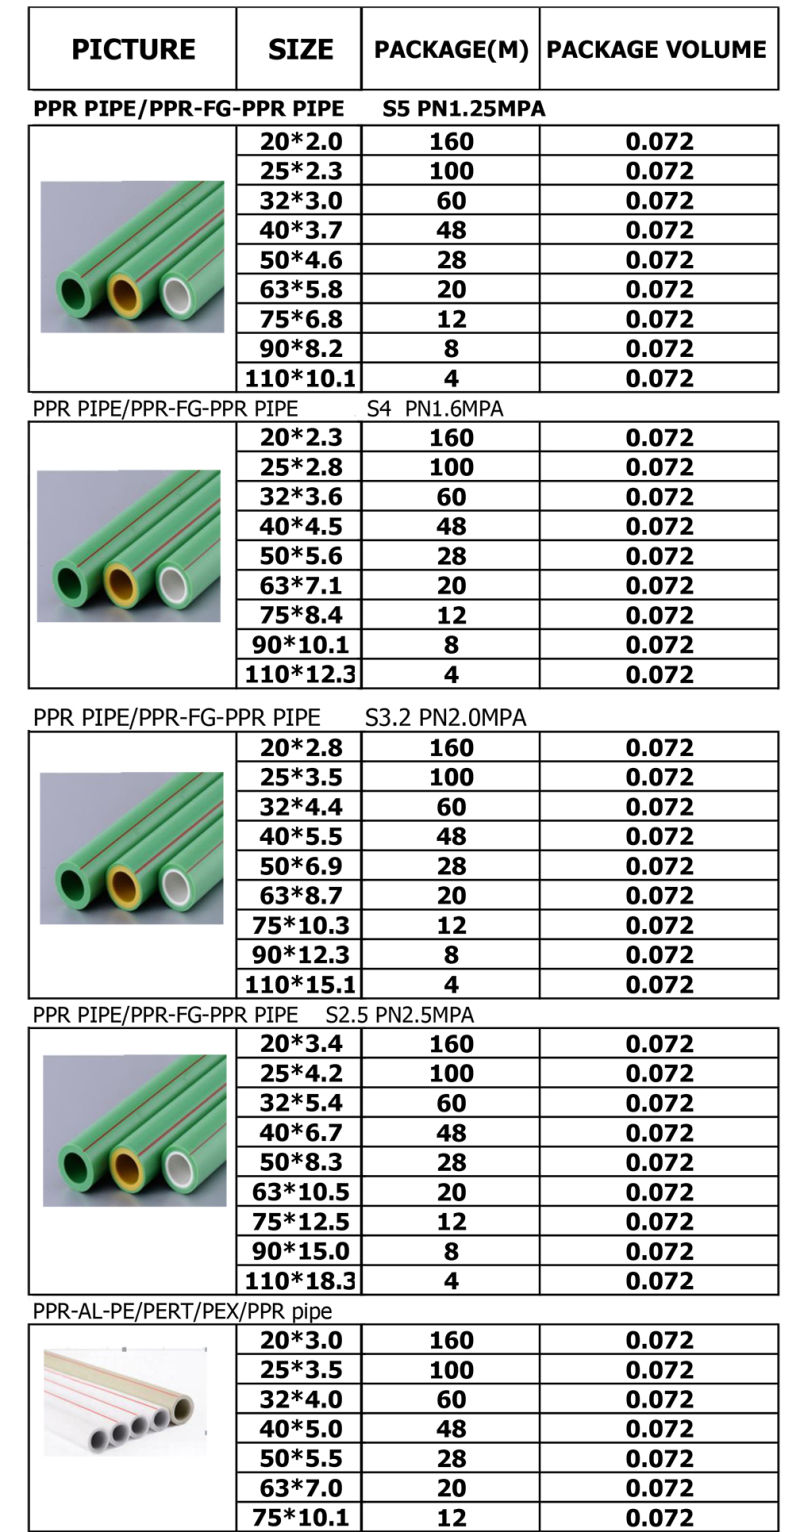 Hb-2071 Pprc Pipe Fittings Water Piping System PPR Pipes & Fittings PPR Pipes and Fittings 200mm PP-R Fitting